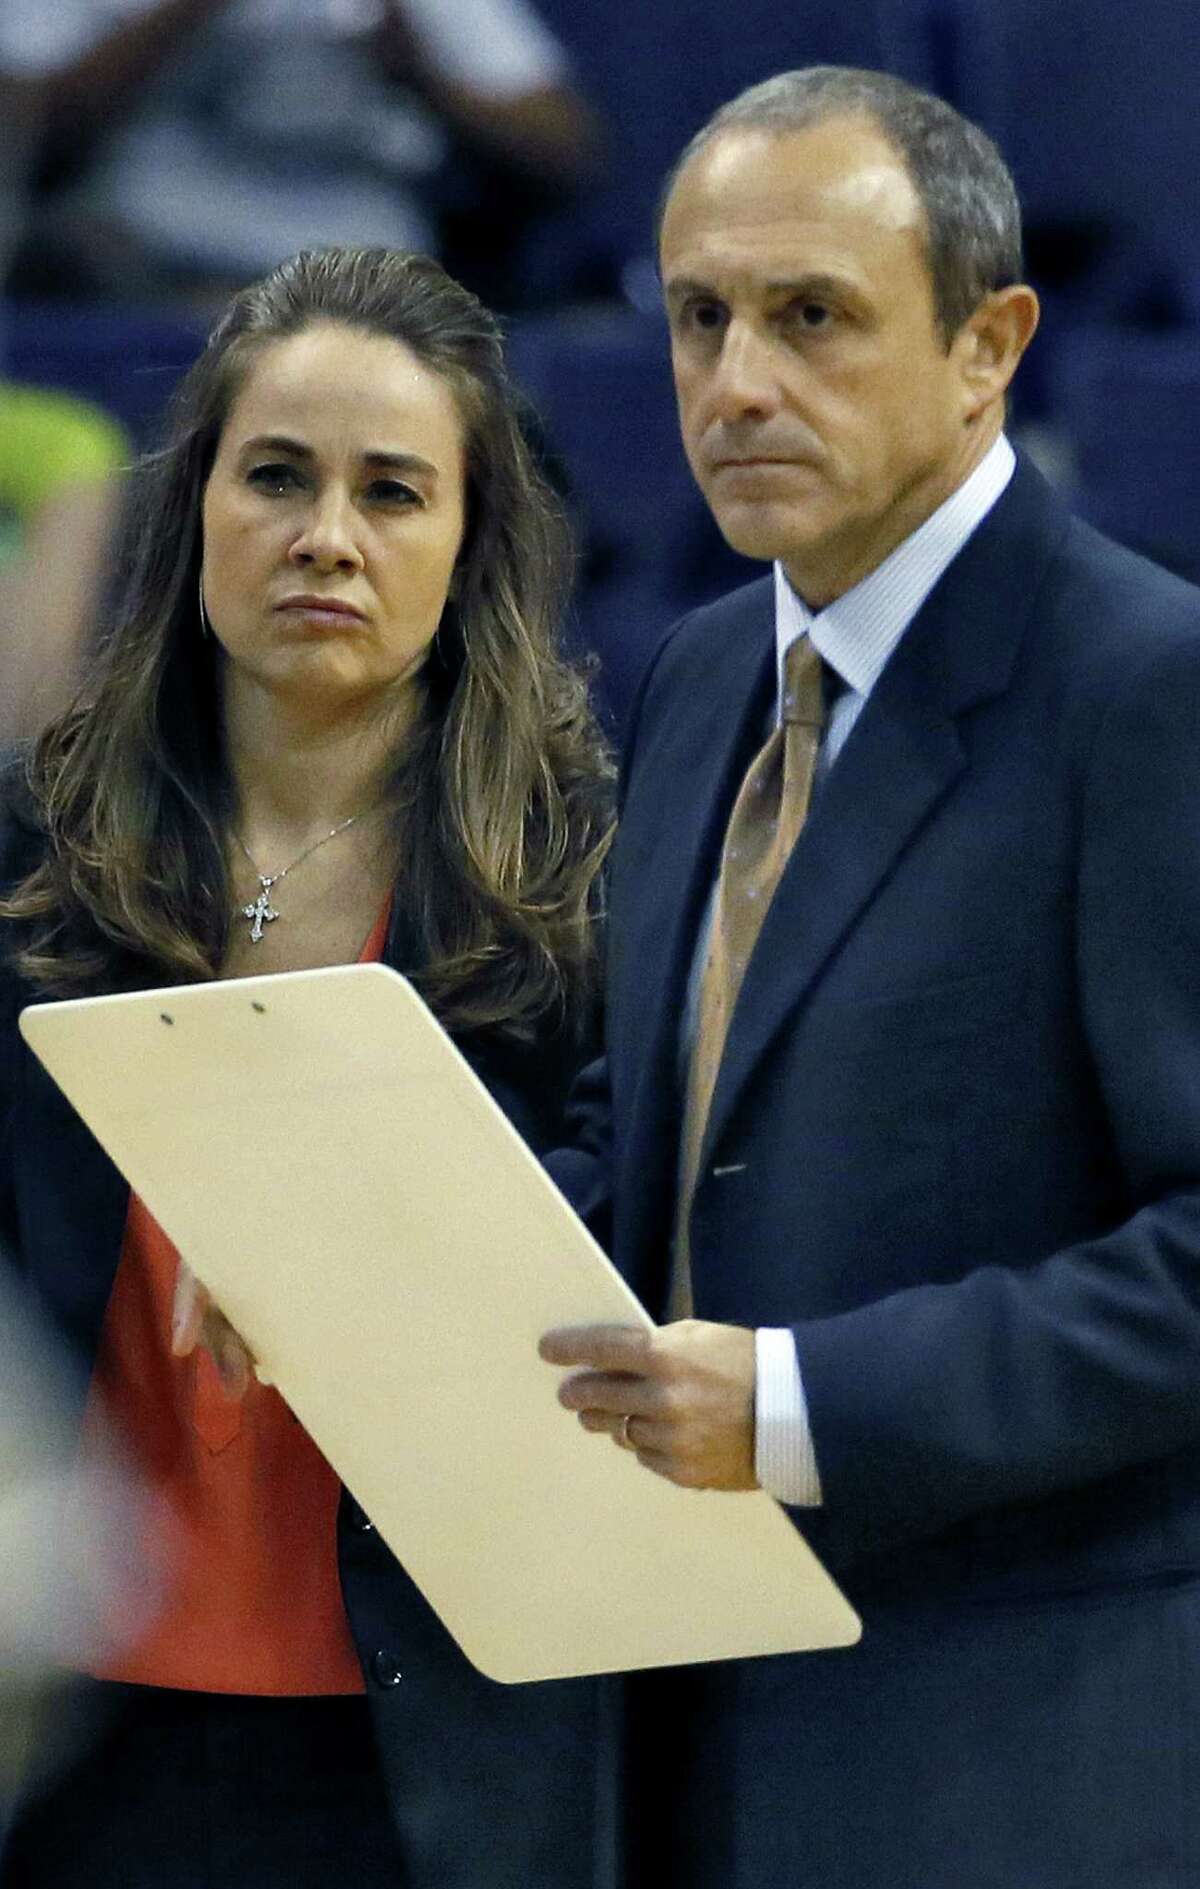 Spurs assistant coach Ettore Messina (right), who took Gregg Popovich's place Thursday, and assistant Becky Hammon discuss a play during the first half against the Suns.